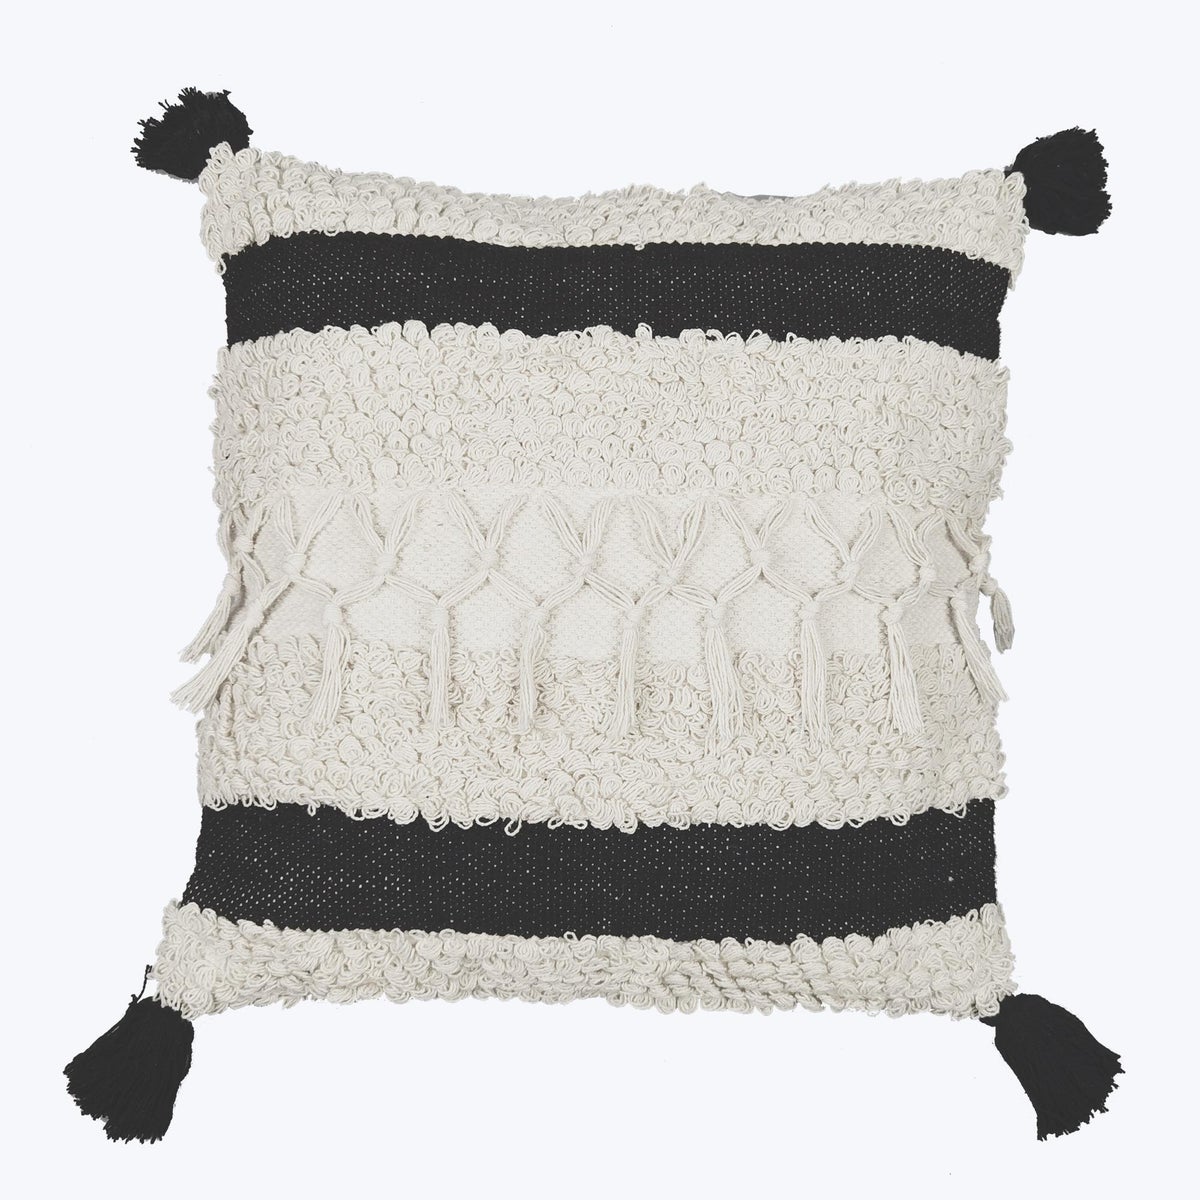 Cotton Hand Woven Pillow with Texture and Tassels, Black and White